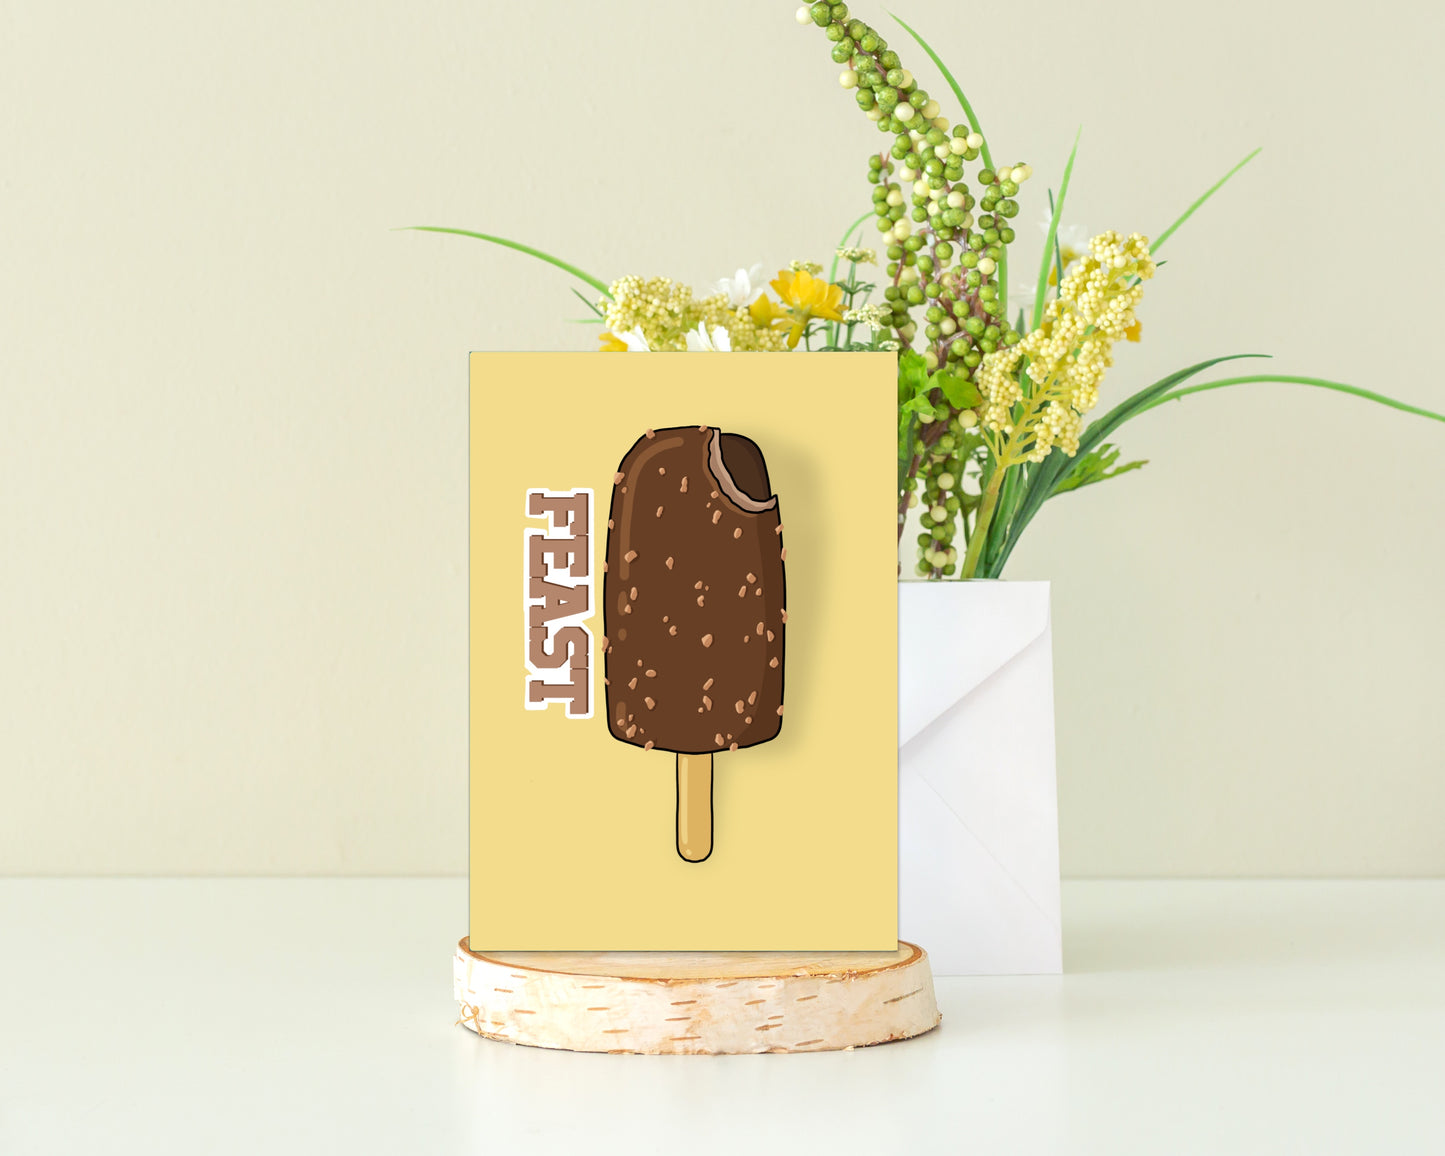 Feast Ice Lolly Greeting Card